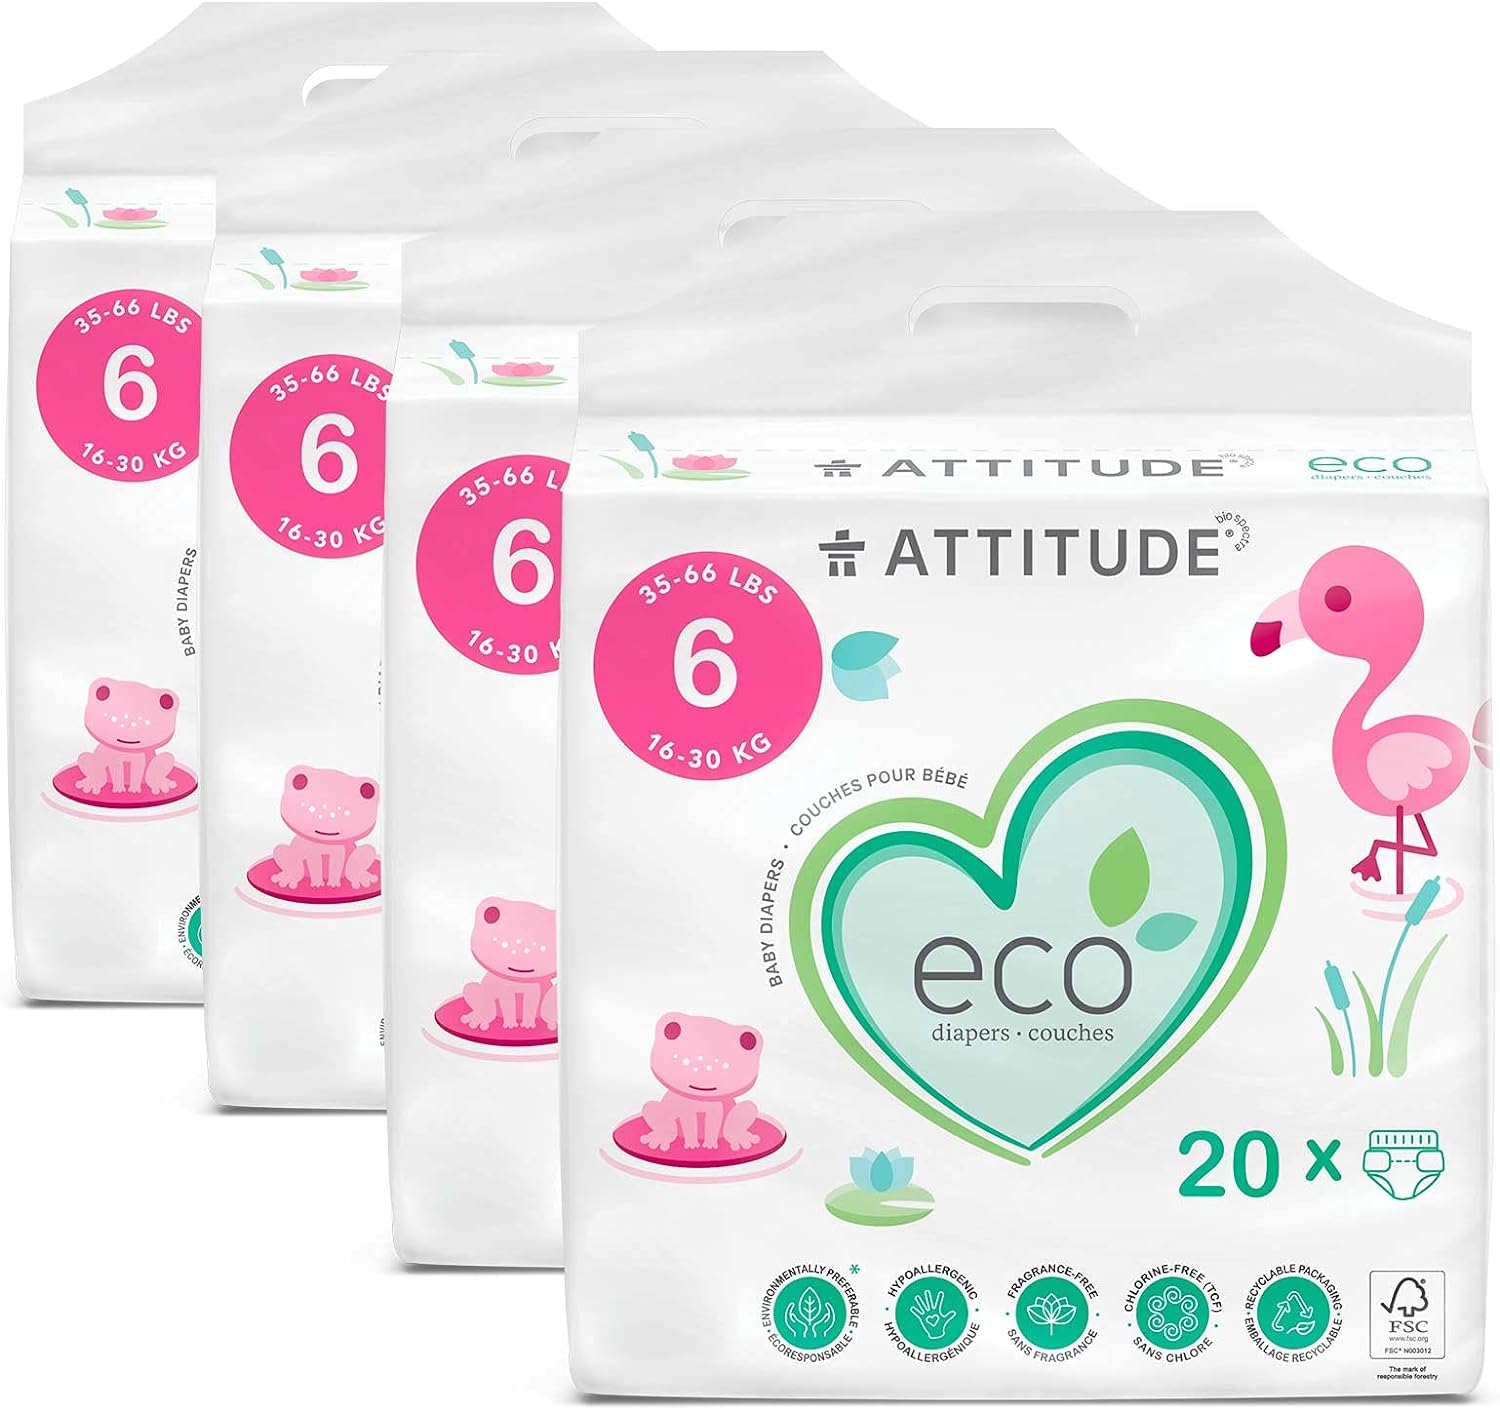 ATTITUDE Non-Toxic Diapers, Eco-Friendly, Hypoallergenic, Safe for Sensitive Skin, Chlorine-Free, Leak-Free & Biodegradable Baby Diapers, Fragrance-Free, Size 6 (35-66 lbs), 80 Count (4 Packs of 20)